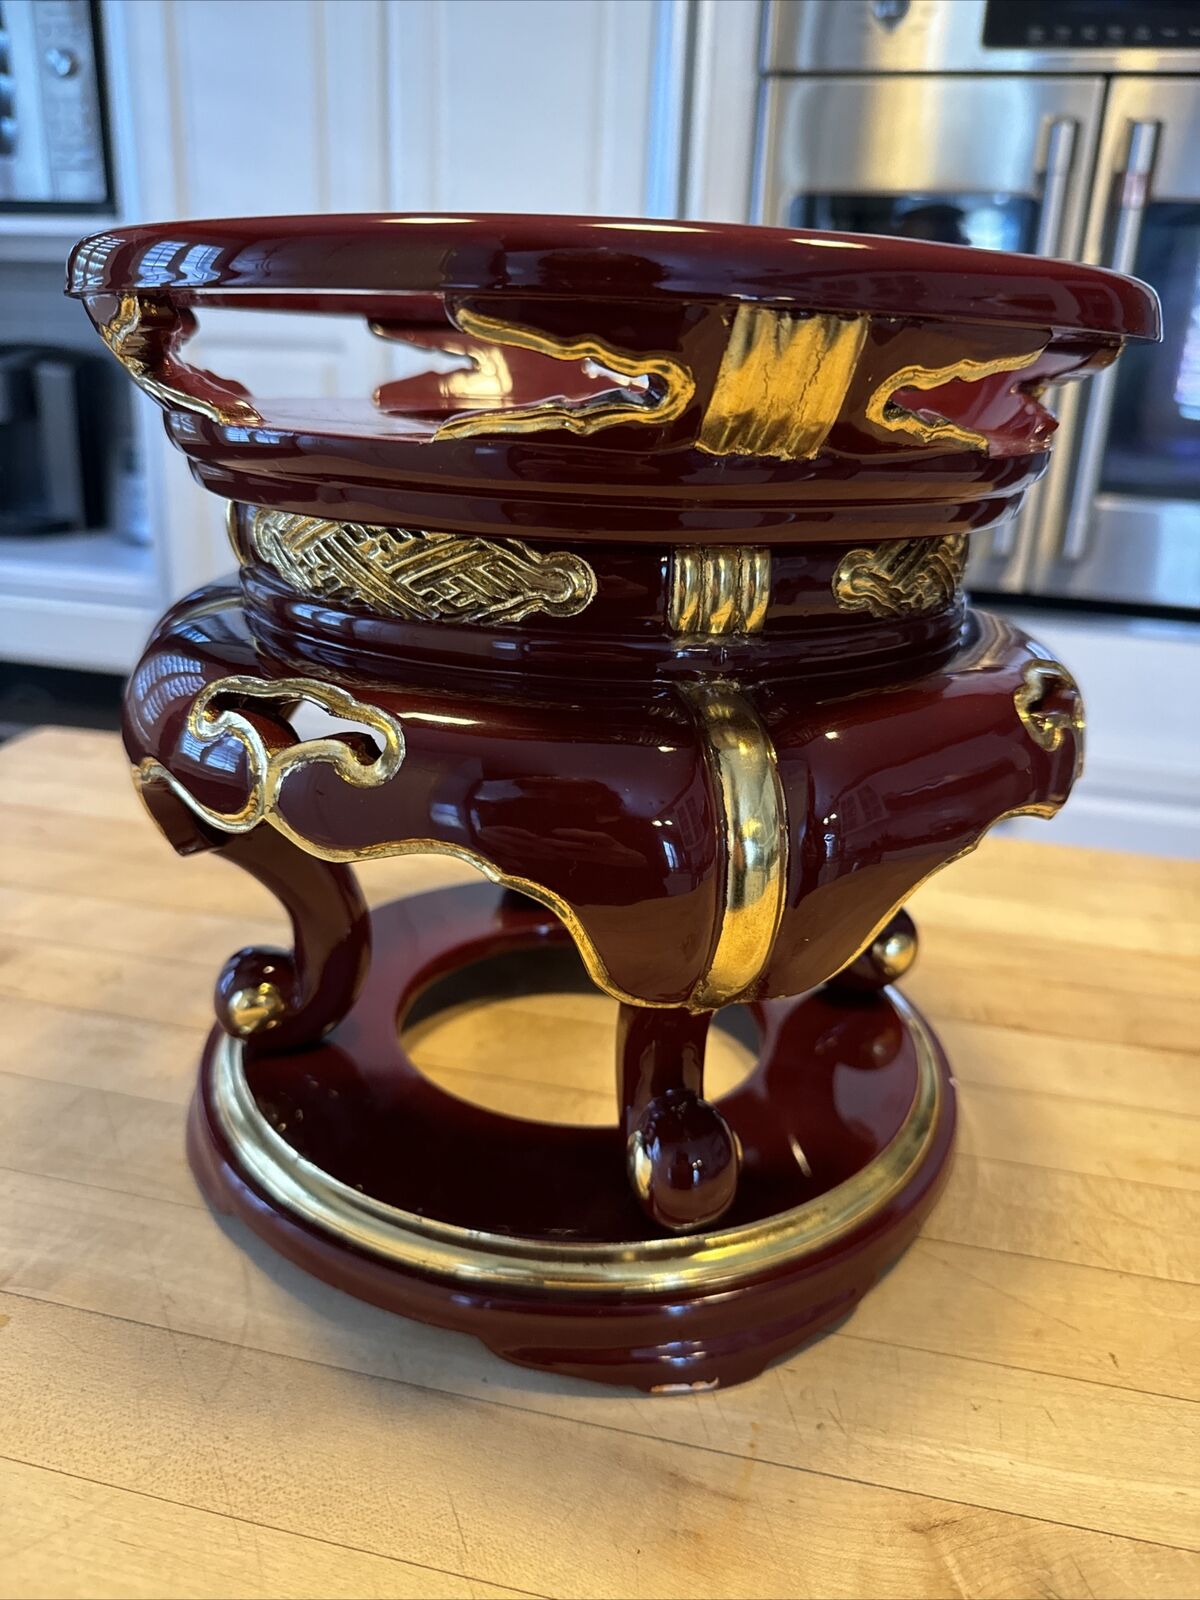 CHINESE RED & GOLD LACQUERED WOOD CARVED STAND FOR FISH BOWL VASE PLANTER